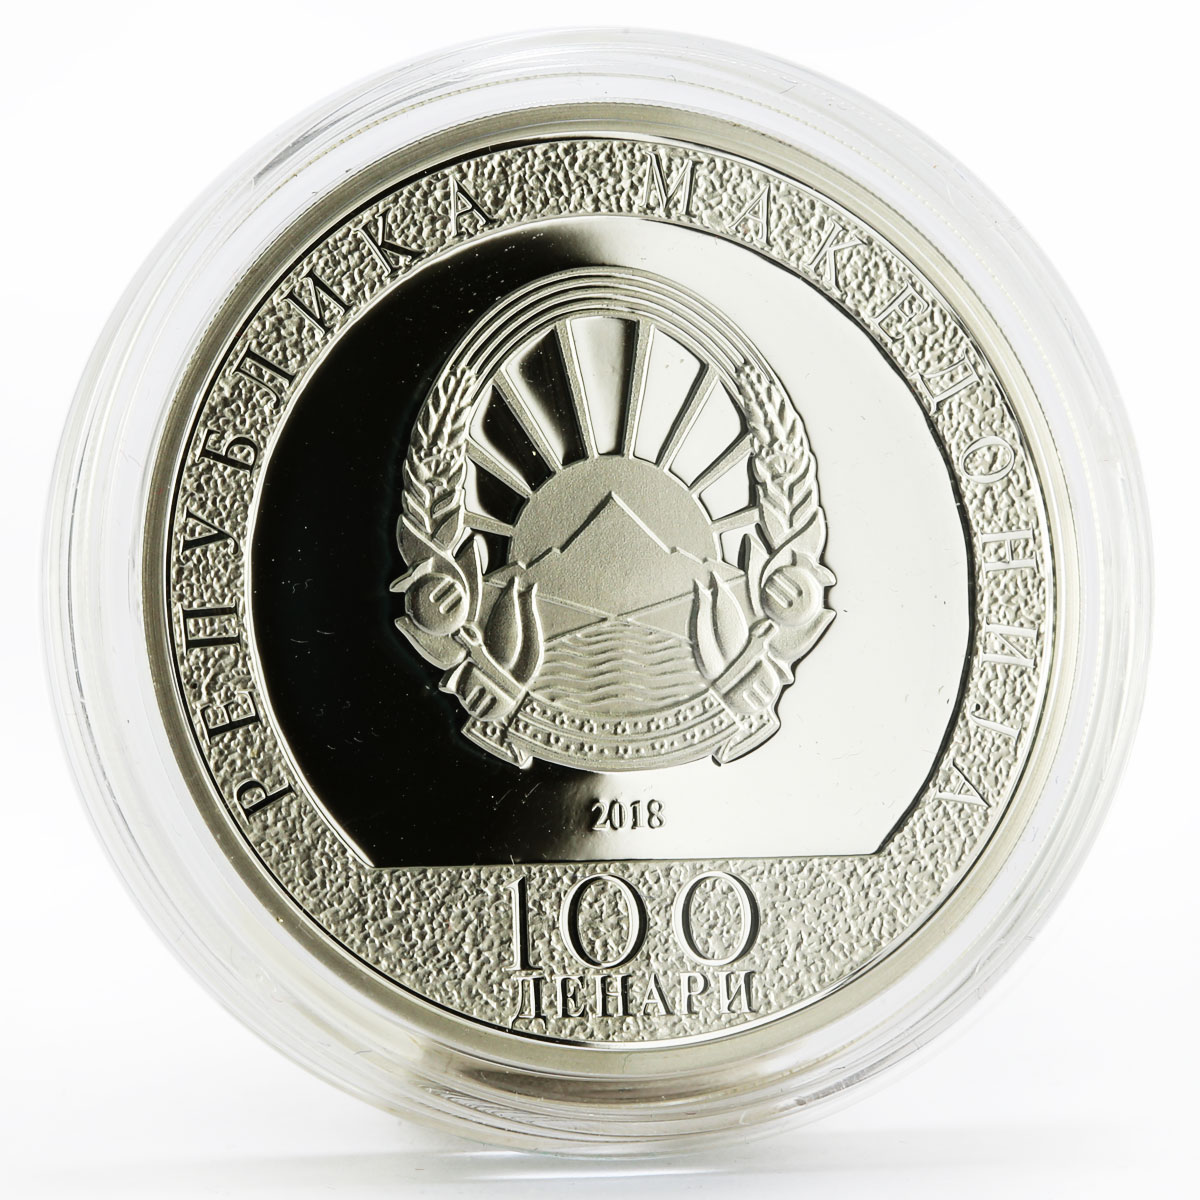 Macedonia 100 denars Safe Year of the Dog colored proof silver coin 2018